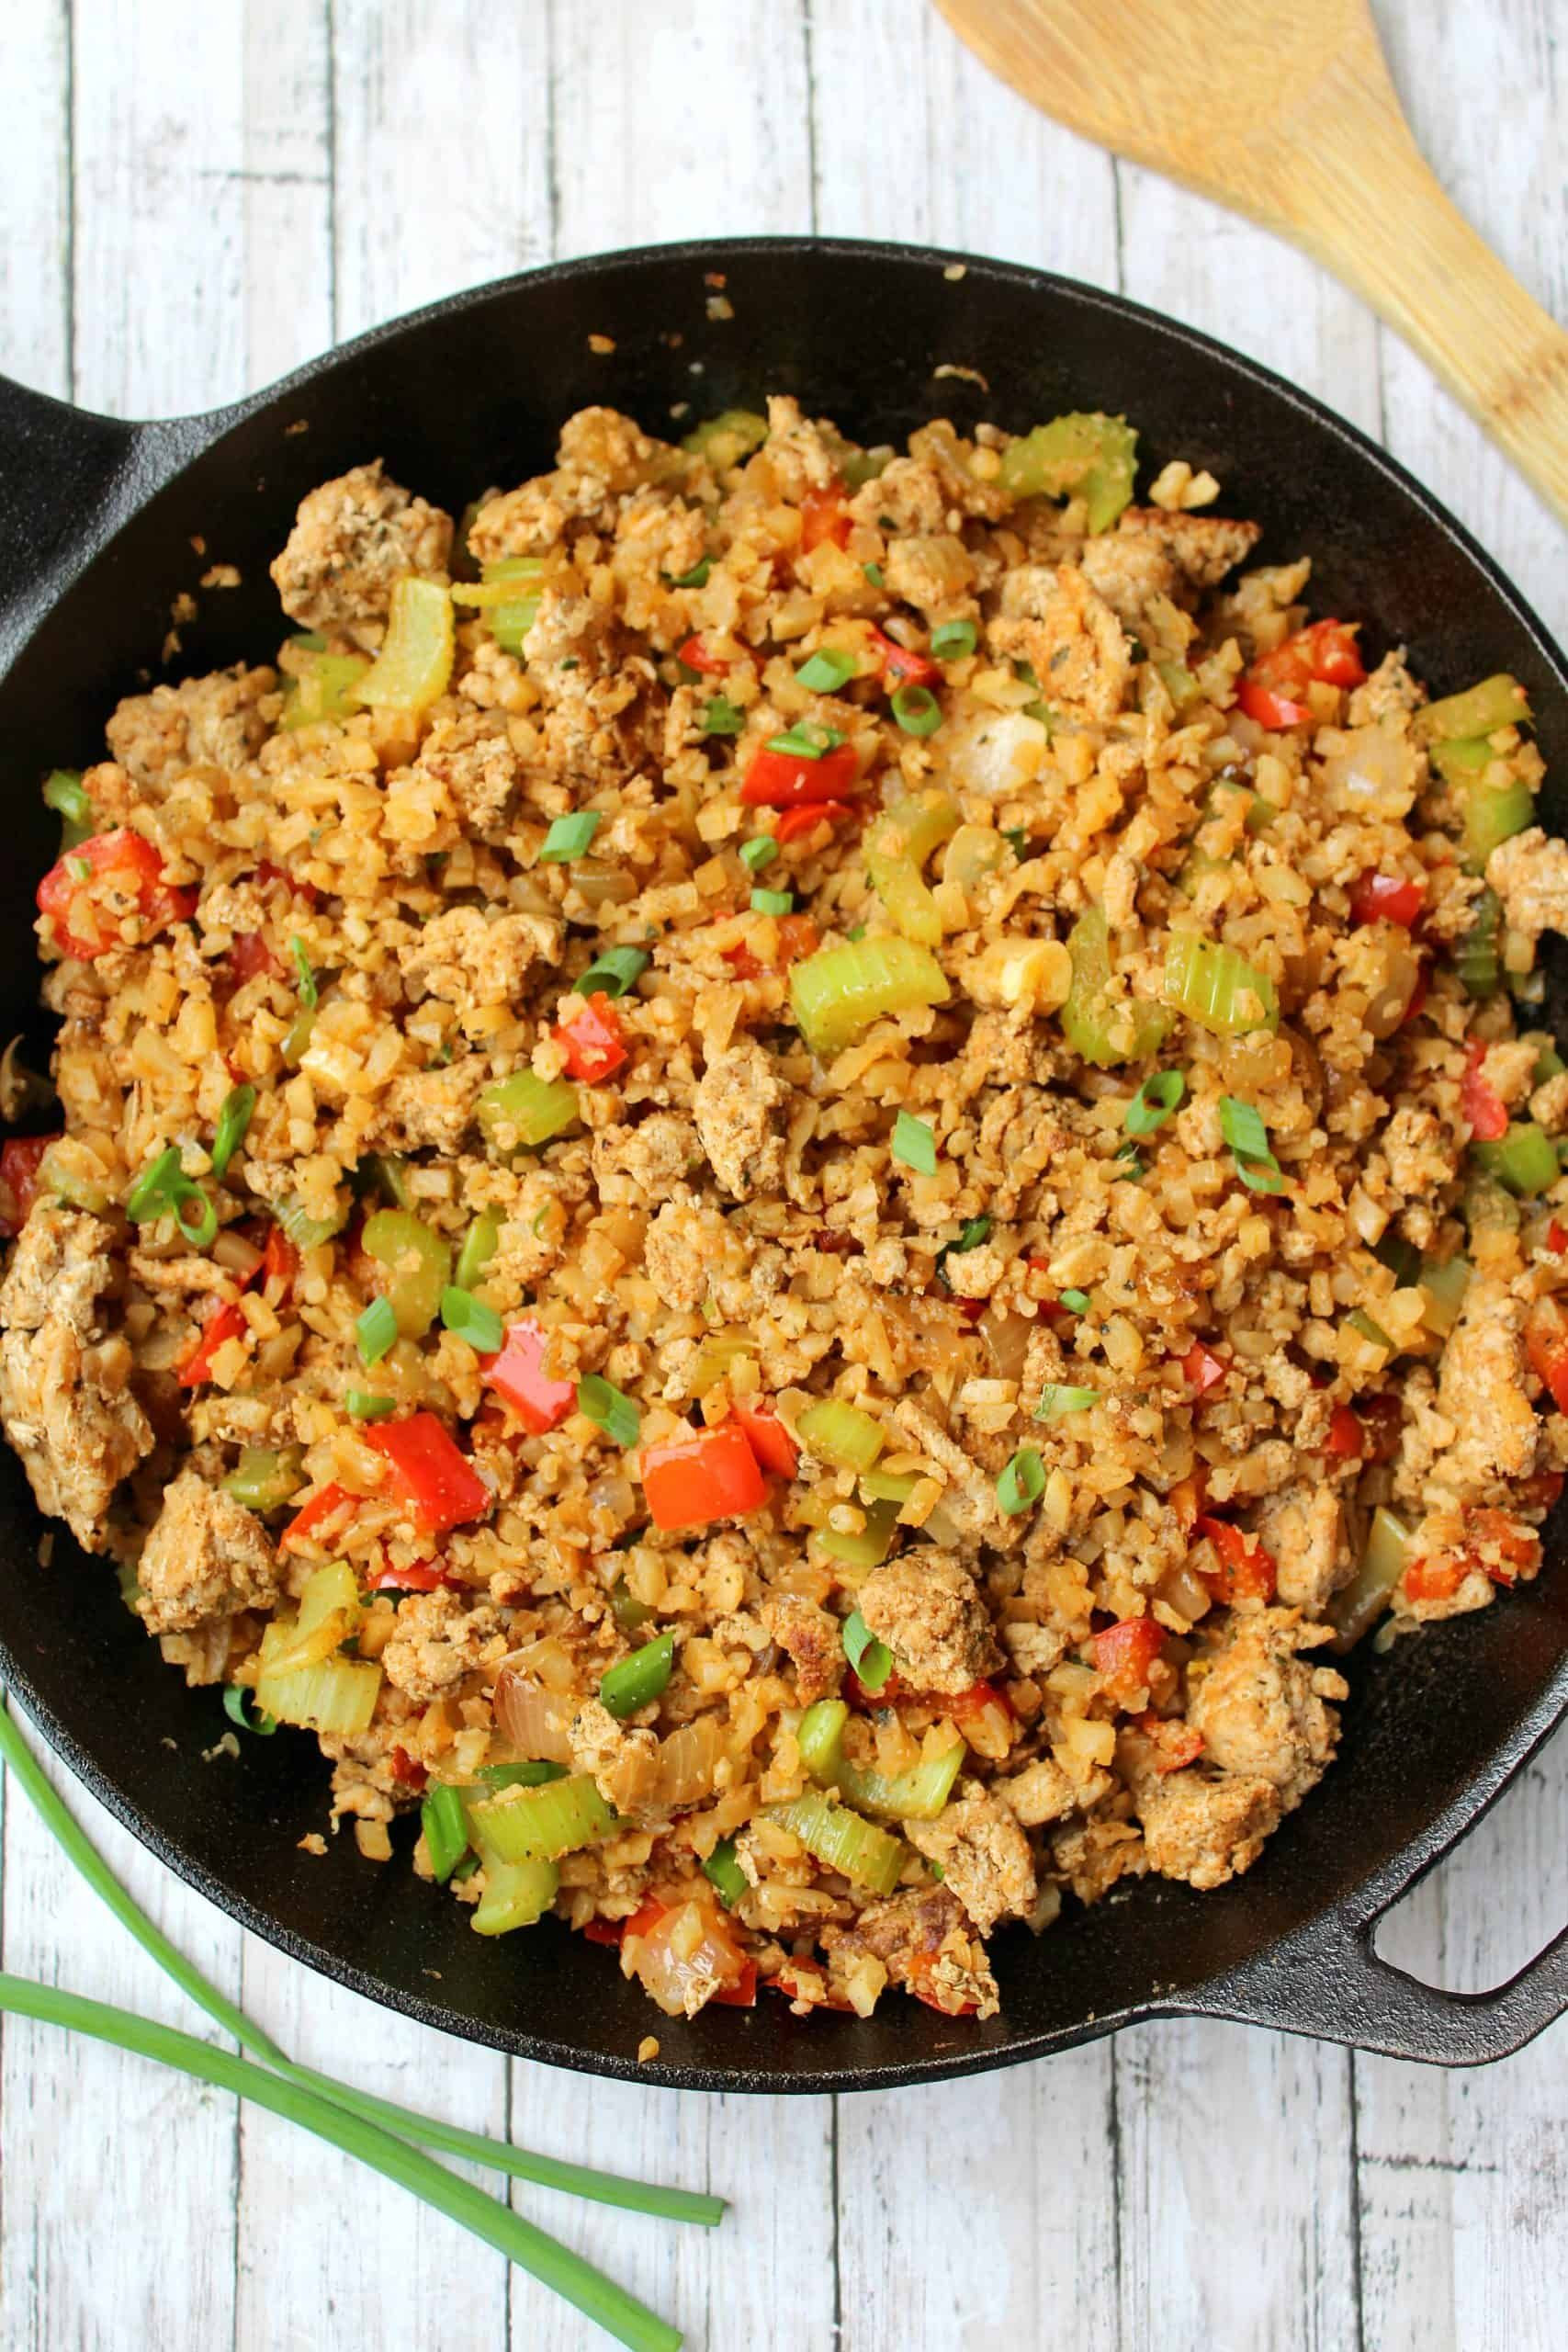 Cauliflower Rice Recipes Healthy Keto Pin on Clean Eating